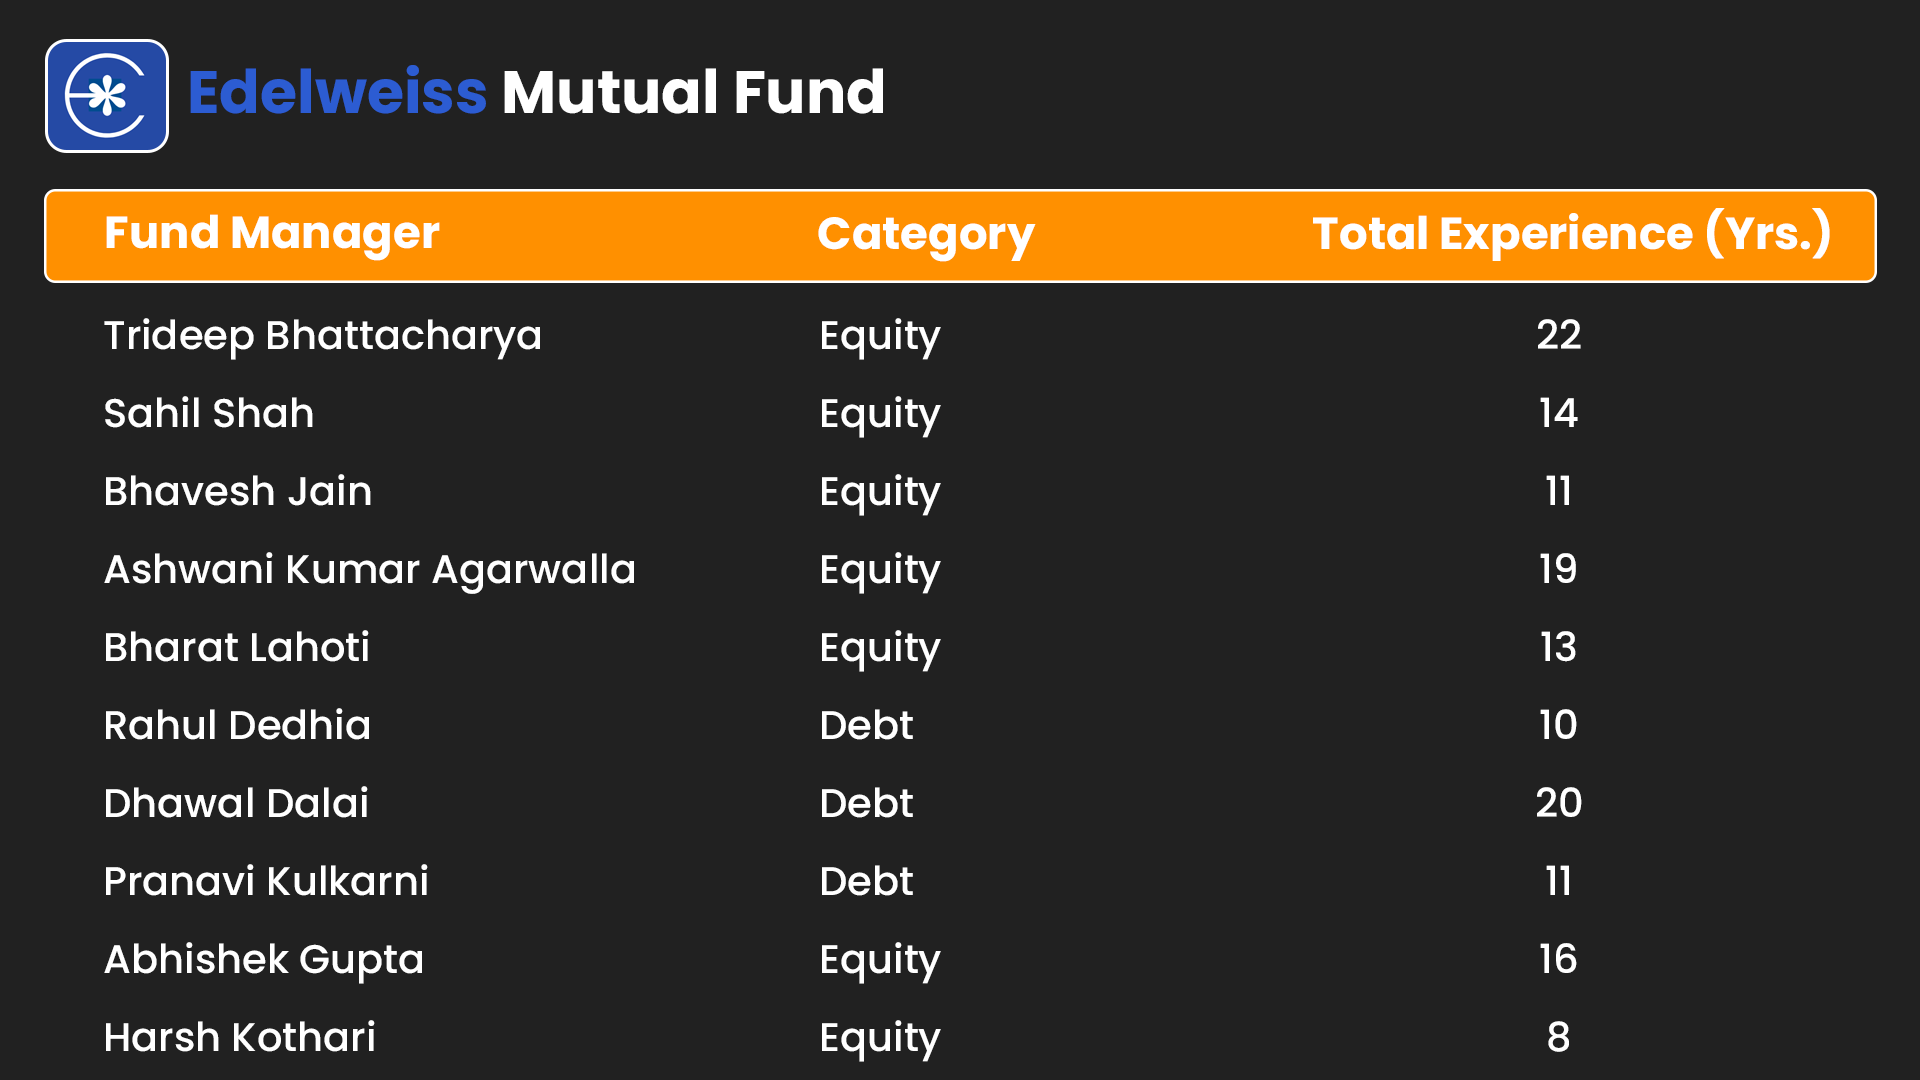 List of All Fund Managers Edelweiss Mutual Fund